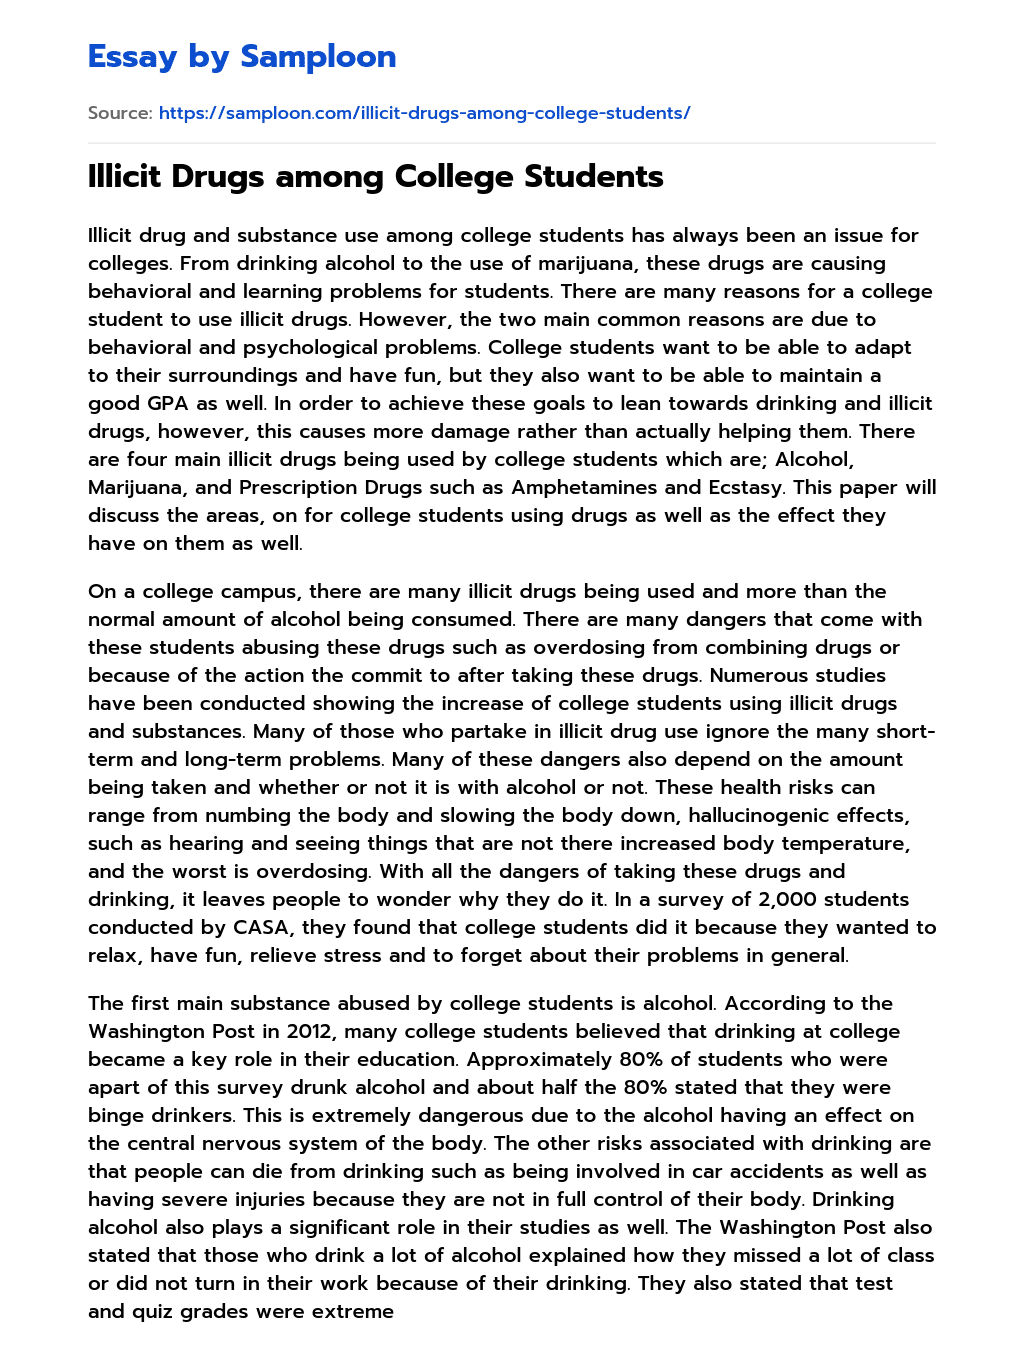 Illicit Drugs among College Students essay